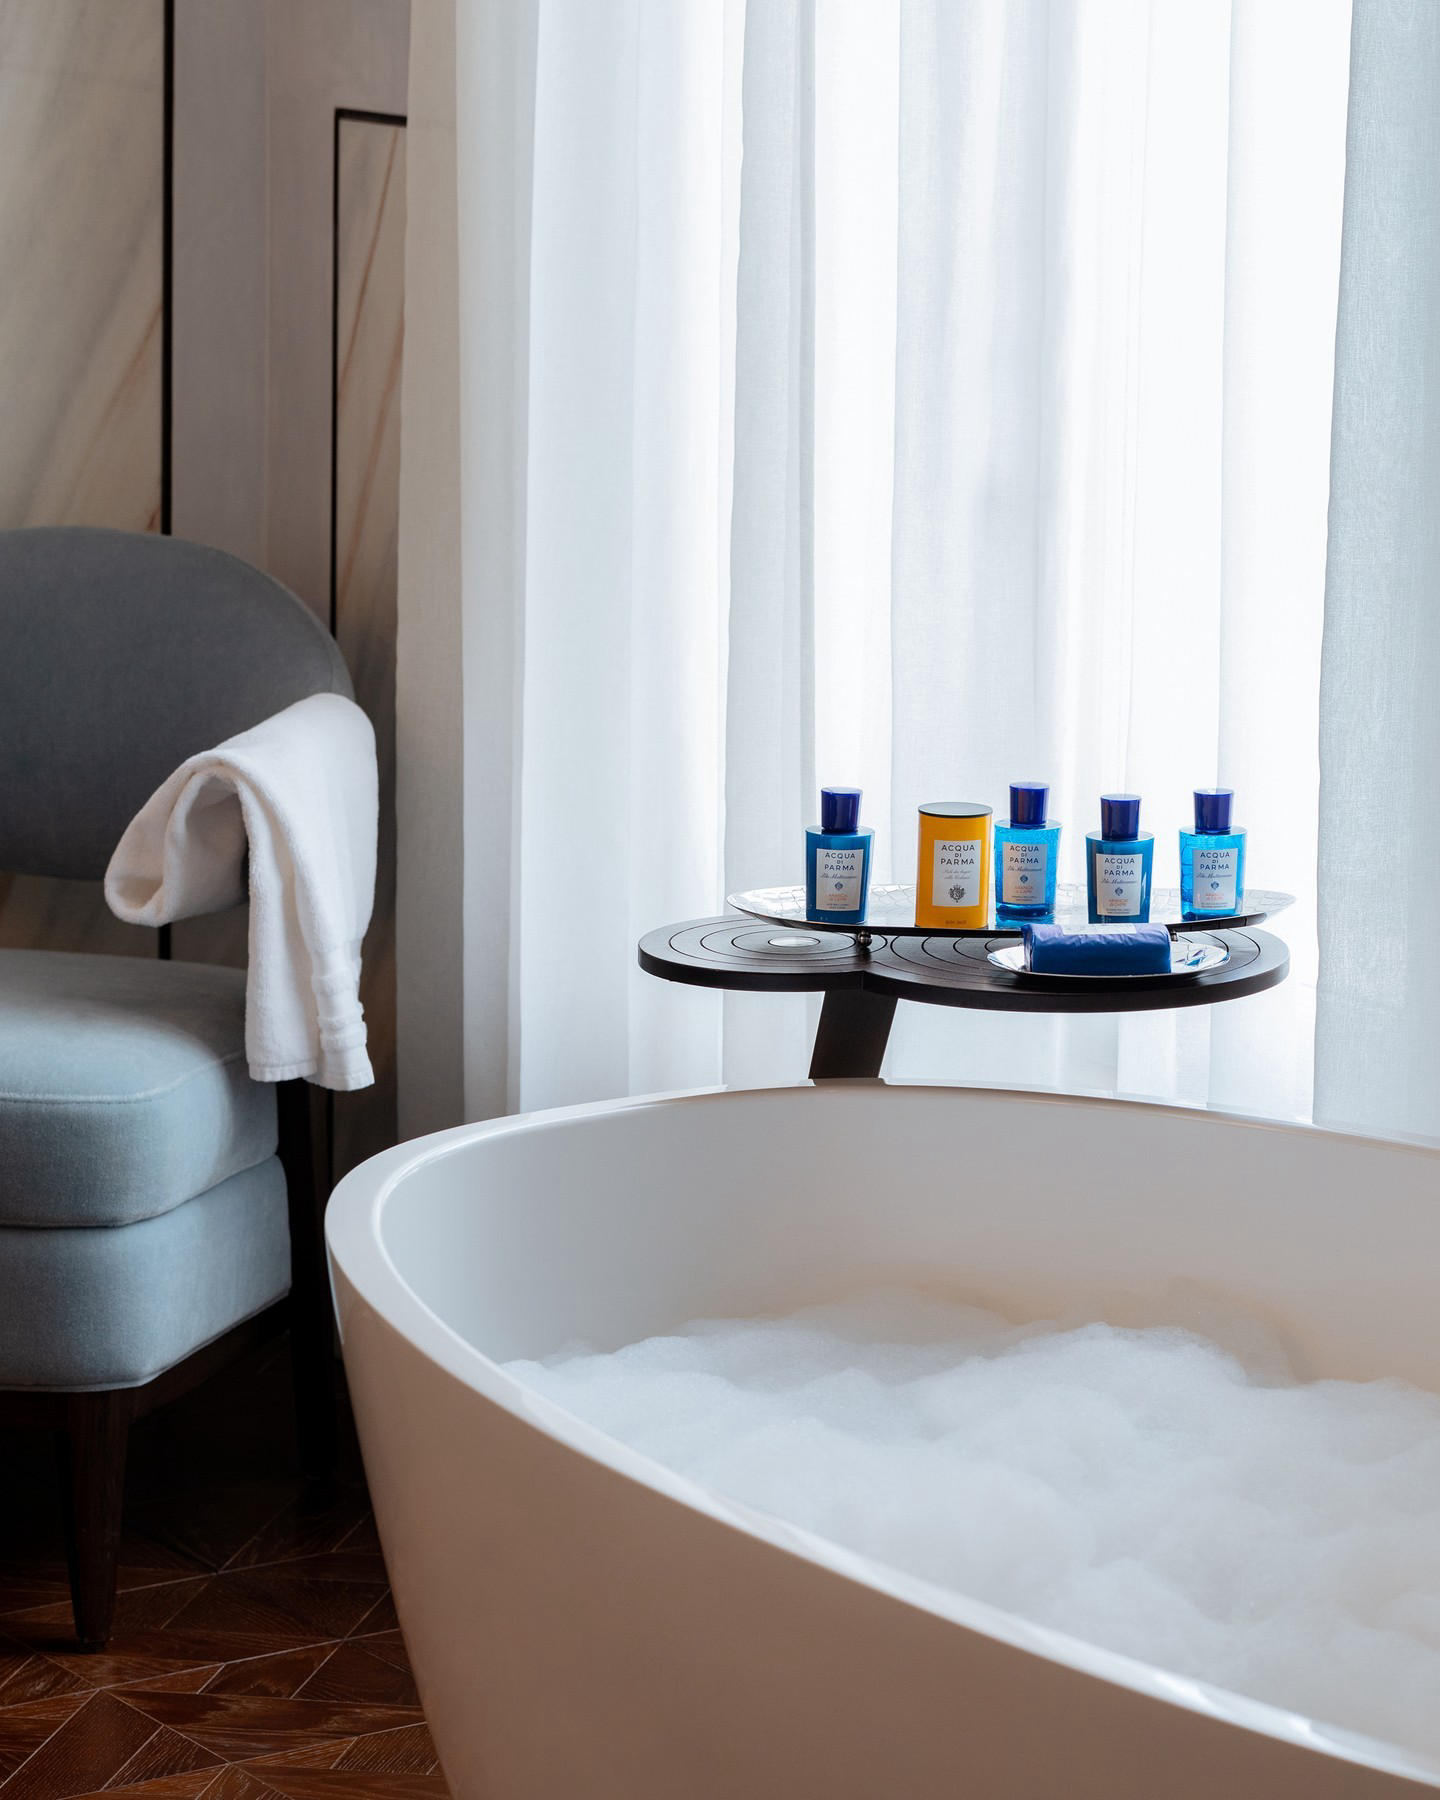 The St. Regis Venice - Indulge in a bubbly bath experience